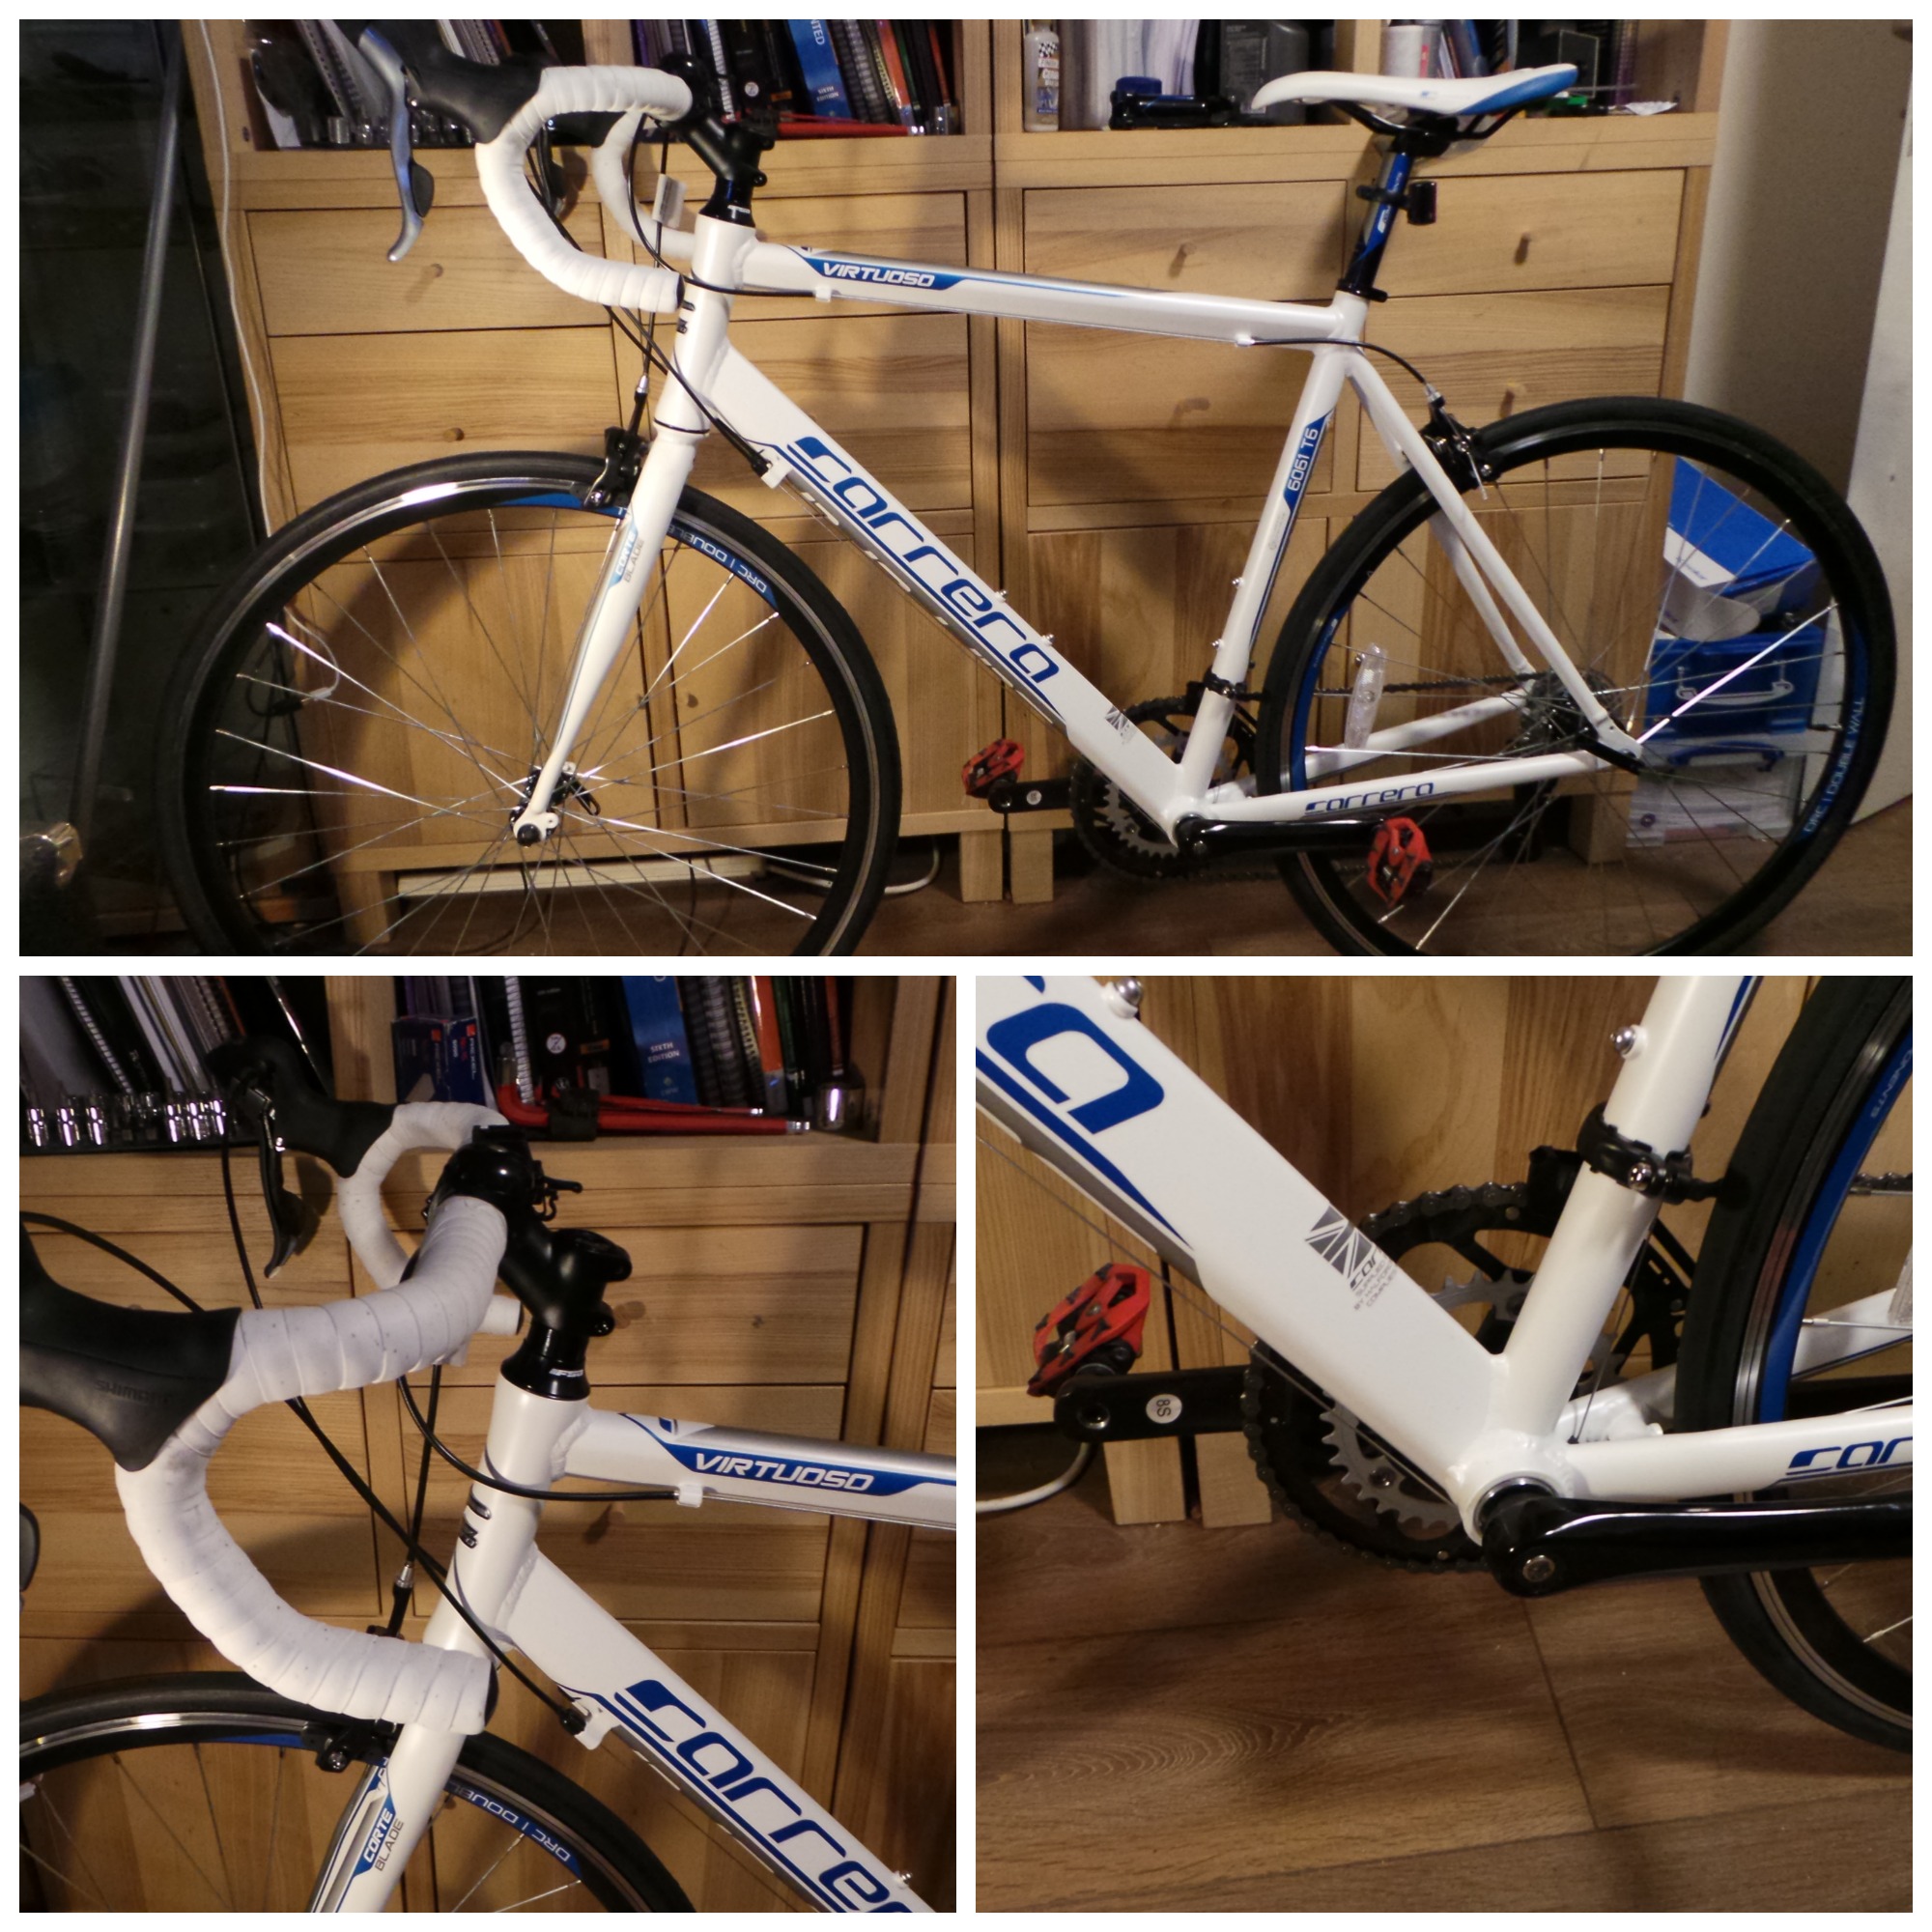 Carrera Virtuoso 35 degree stem and Time pedals